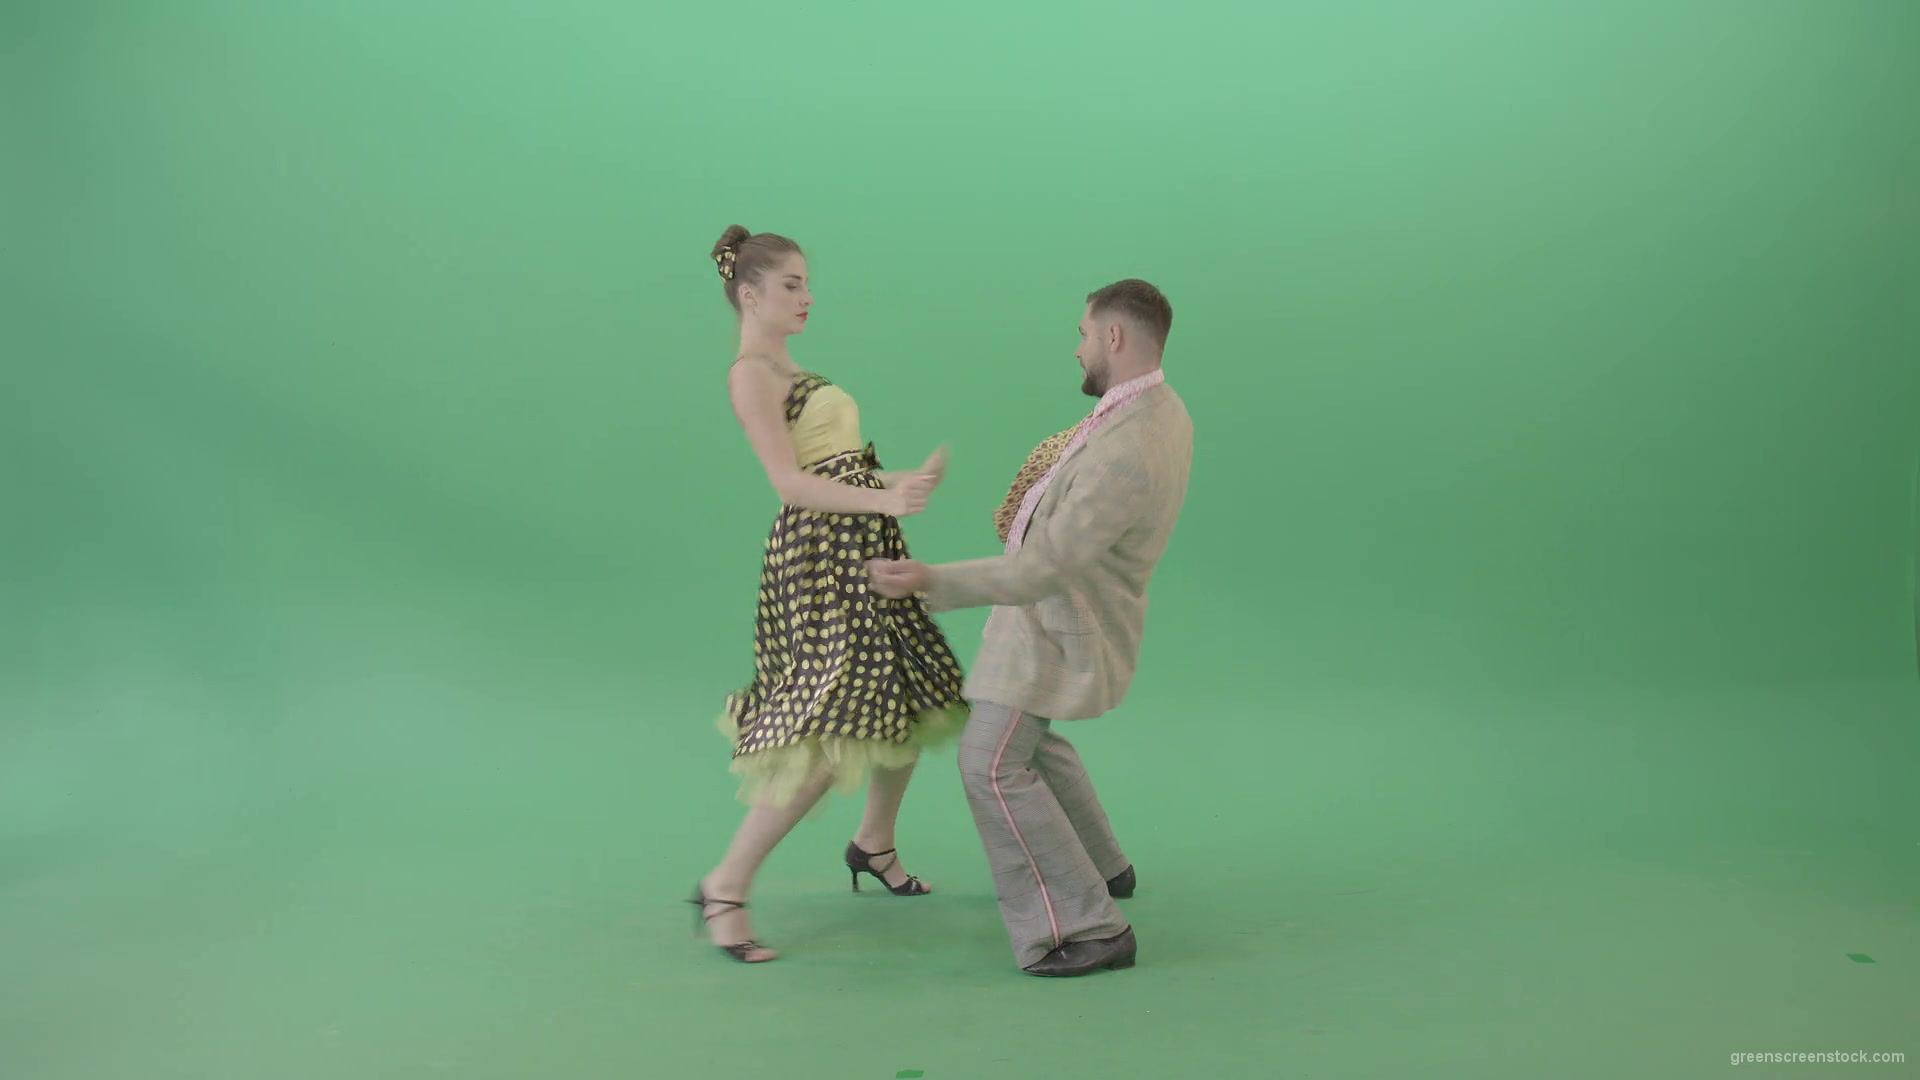 Amazing-couple-dance-Lindy-Hop-and-Rock-and-Roll-isolated-on-Green-Screen-4K-Video-Footage-1920_006 Green Screen Stock